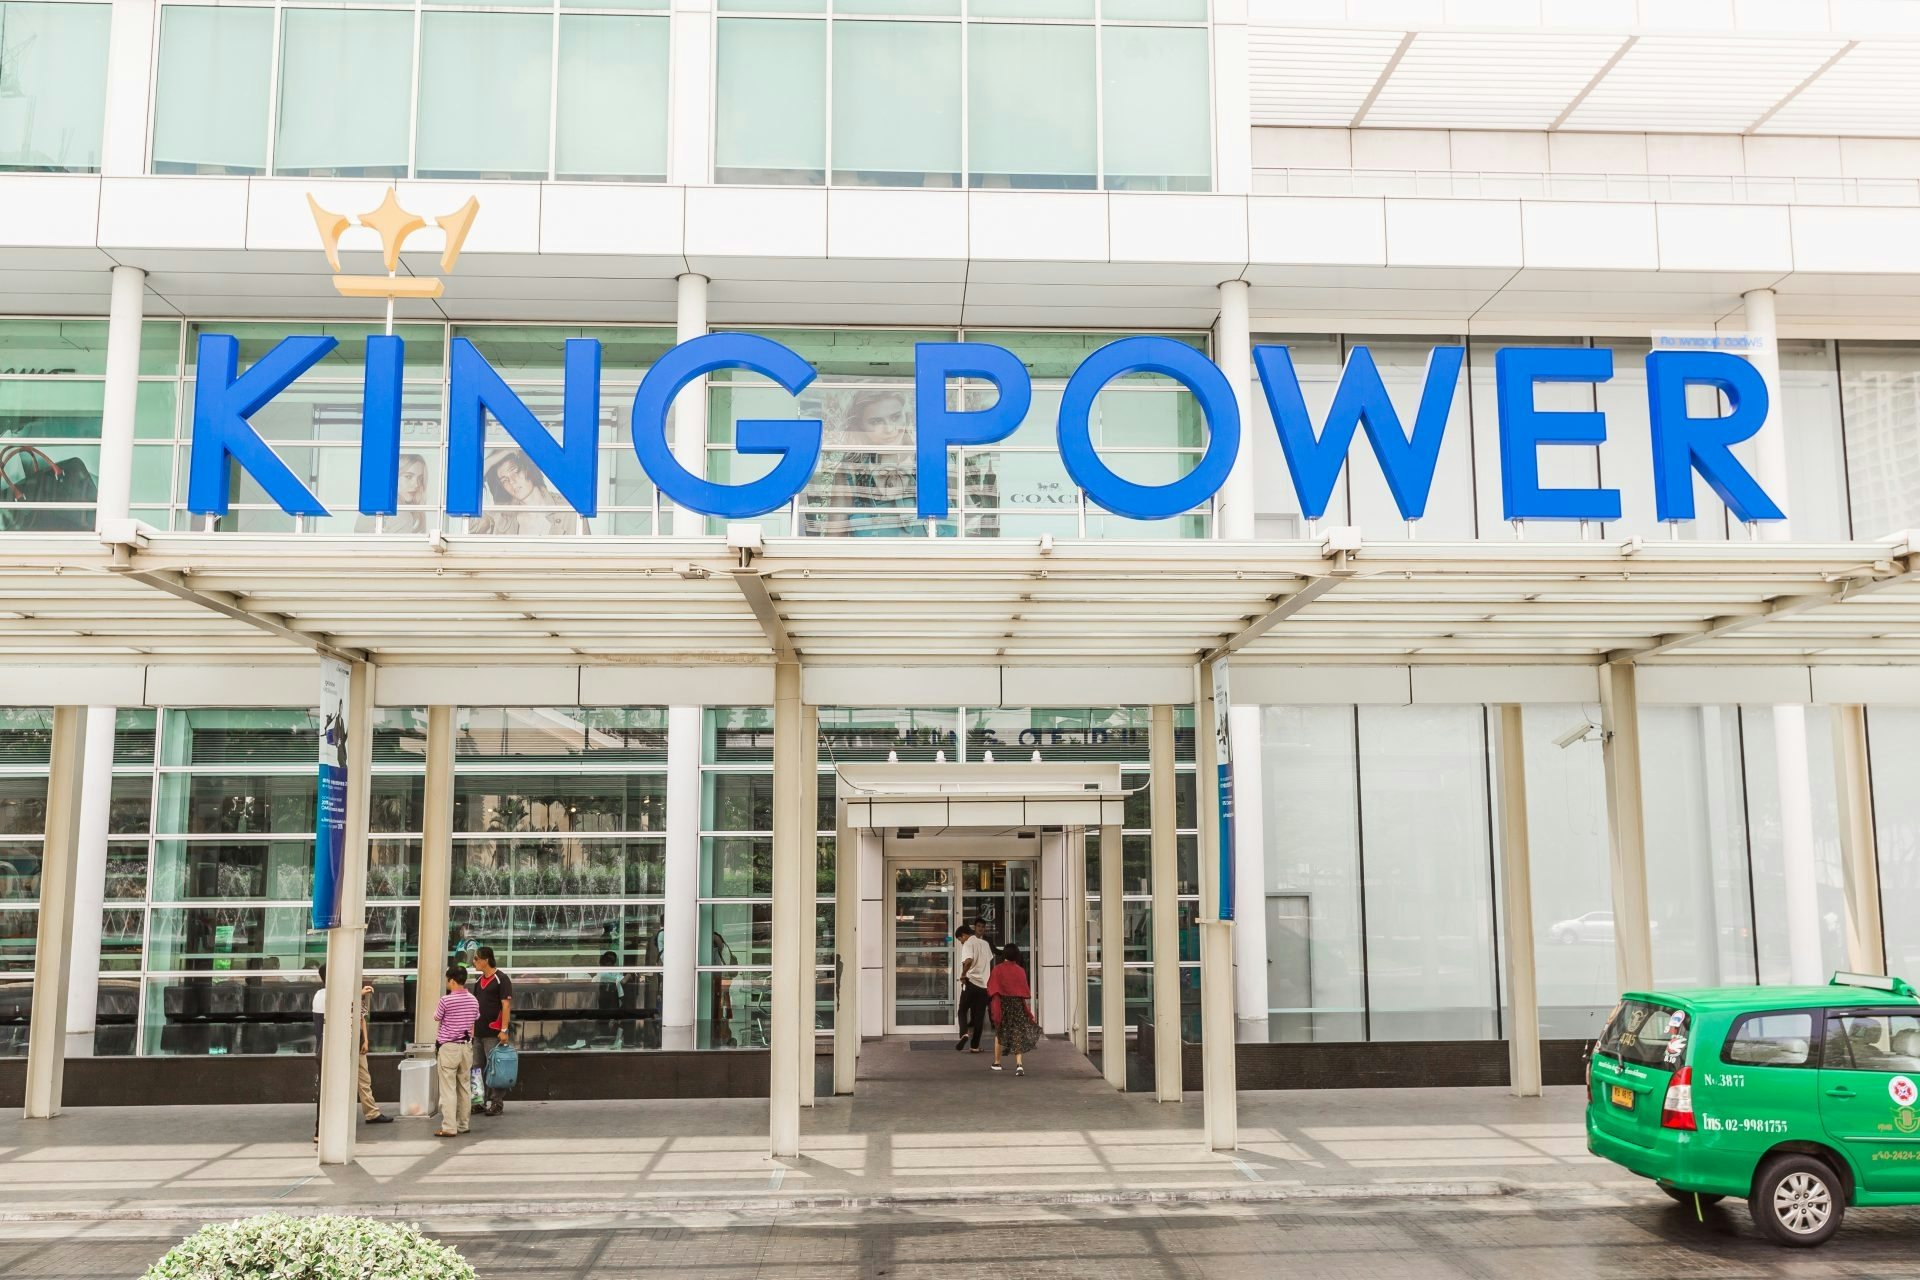 The King Power duty-free shopping center in Bangkok. King Power is one of the Thai firms that has partnered with TripAdvisor.
Photo: Shutterstock